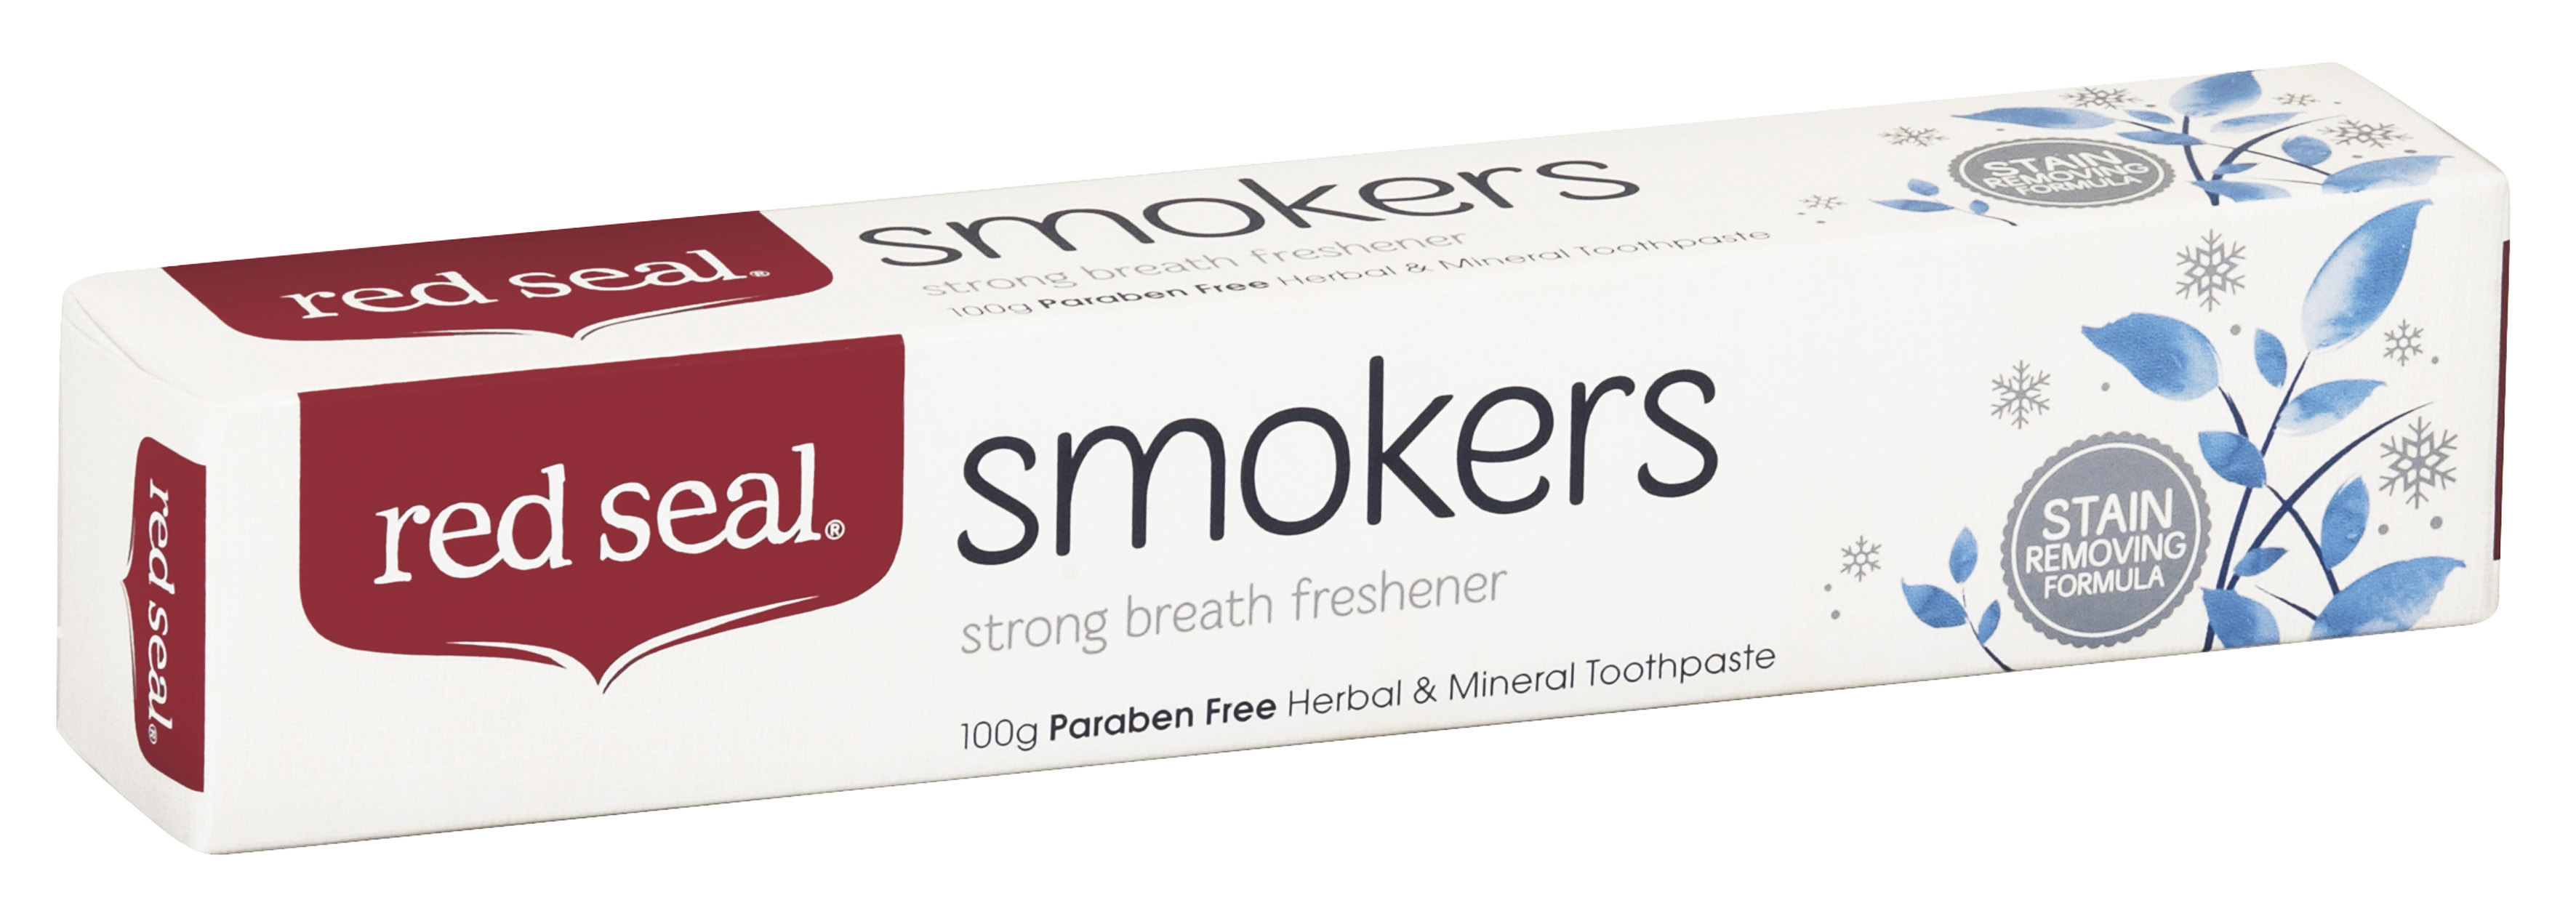 Rs30-12-red-seal-smokers-toothpaste